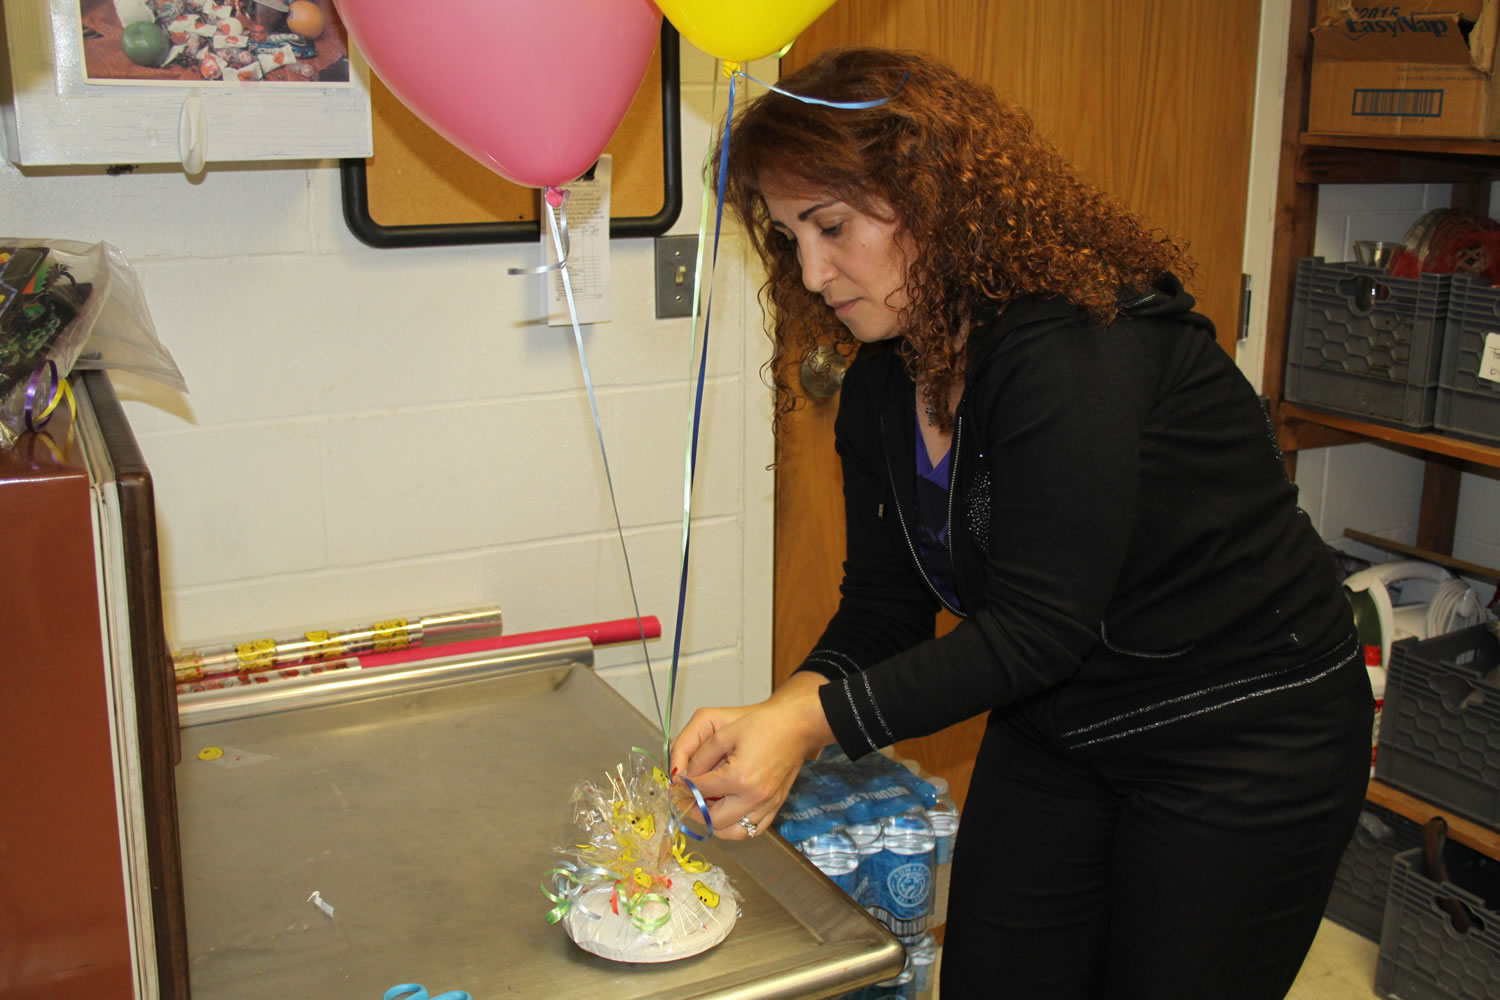 Connecticut College
Lina Hajj, a dining services staff member, assembles a birthday bash care package that parents can order online for pick-up by their kids on campus.